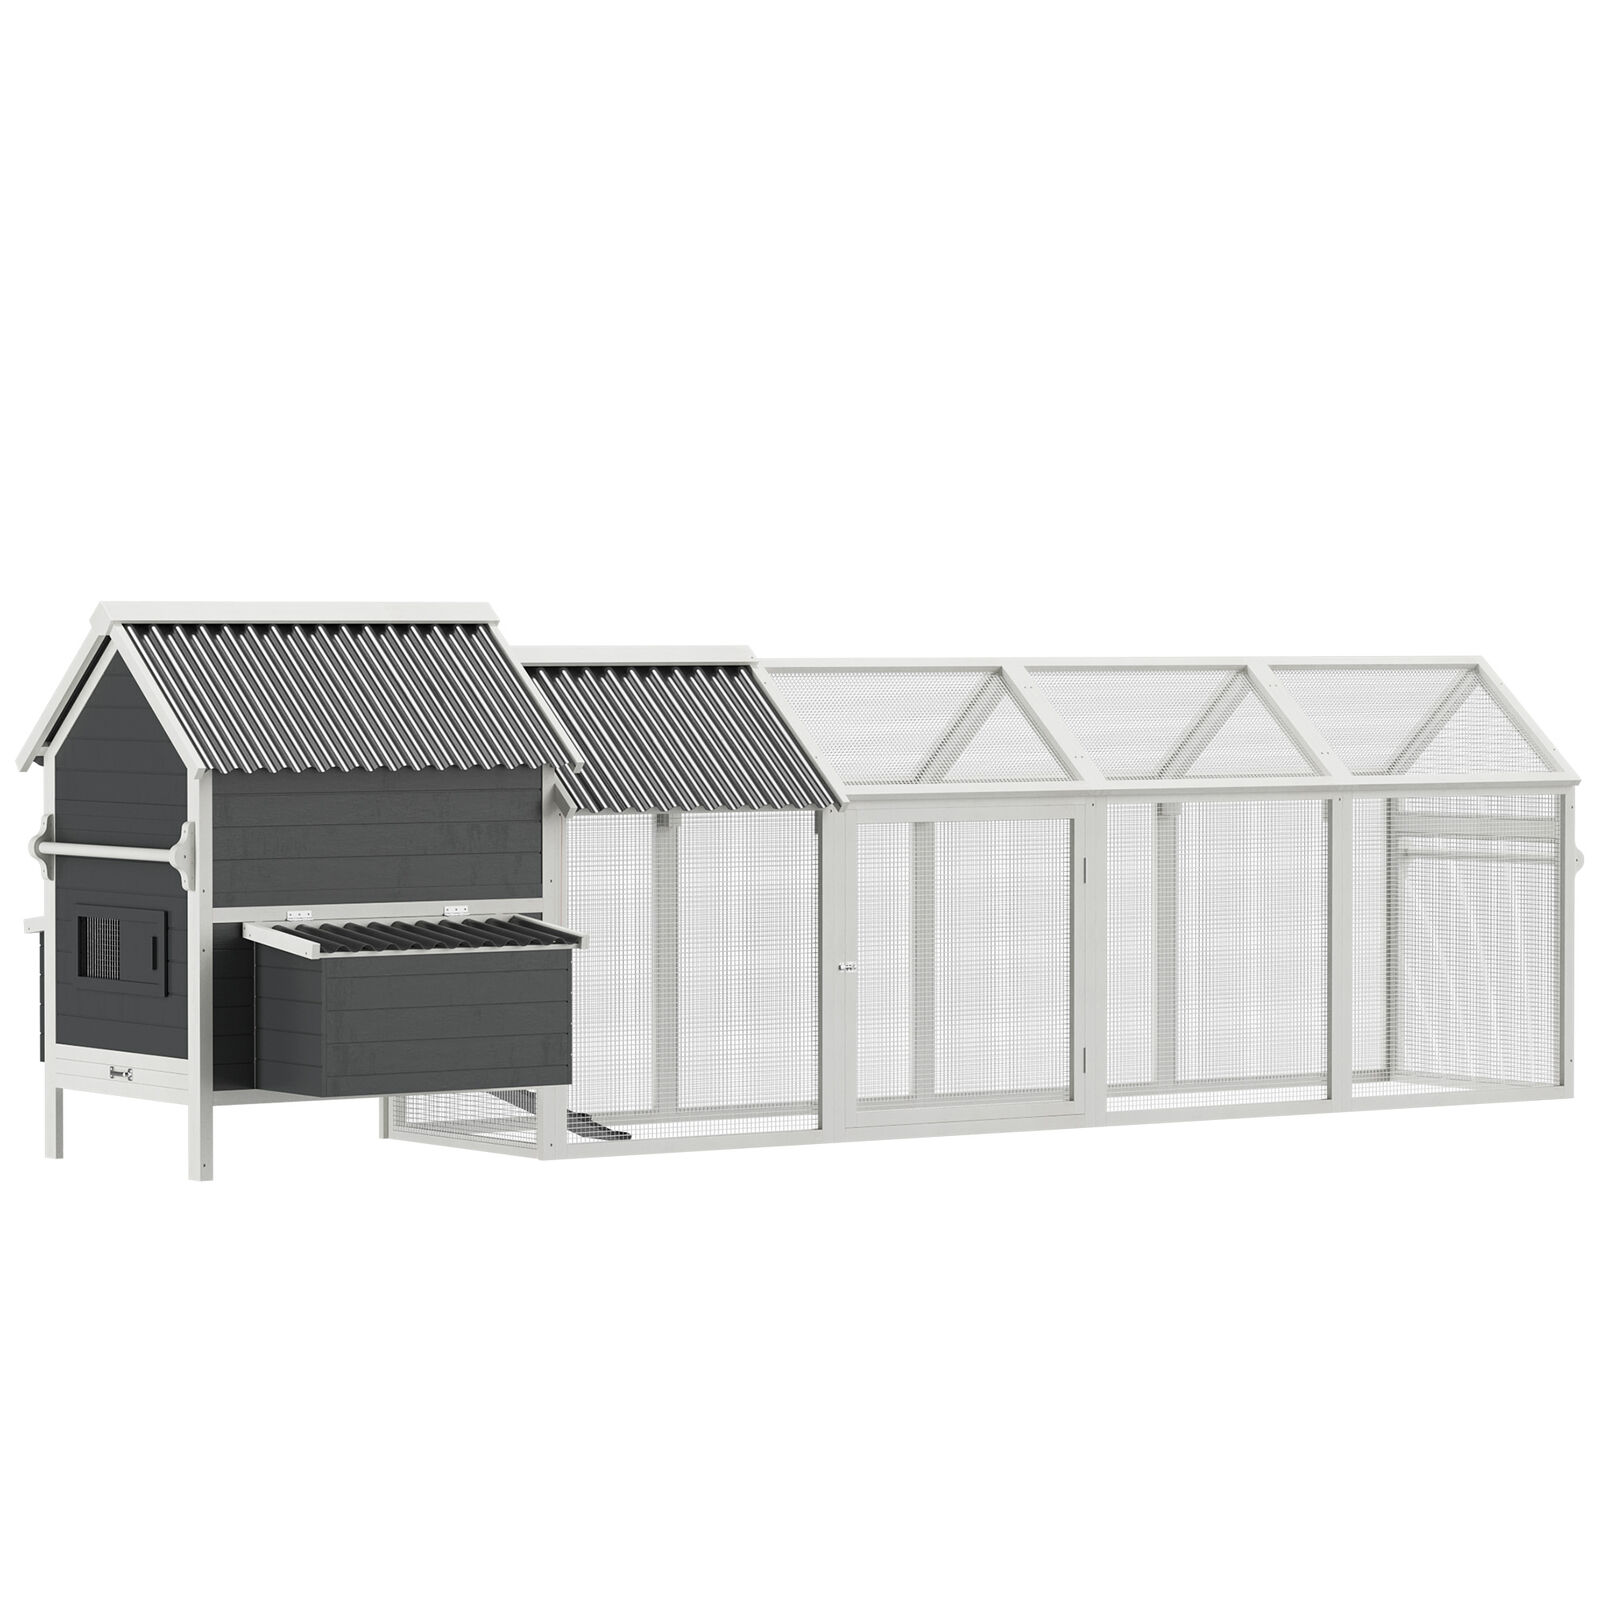  162 in. Large Chicken Coop for 6-8 Chickens with Handle Poltury Fencing 